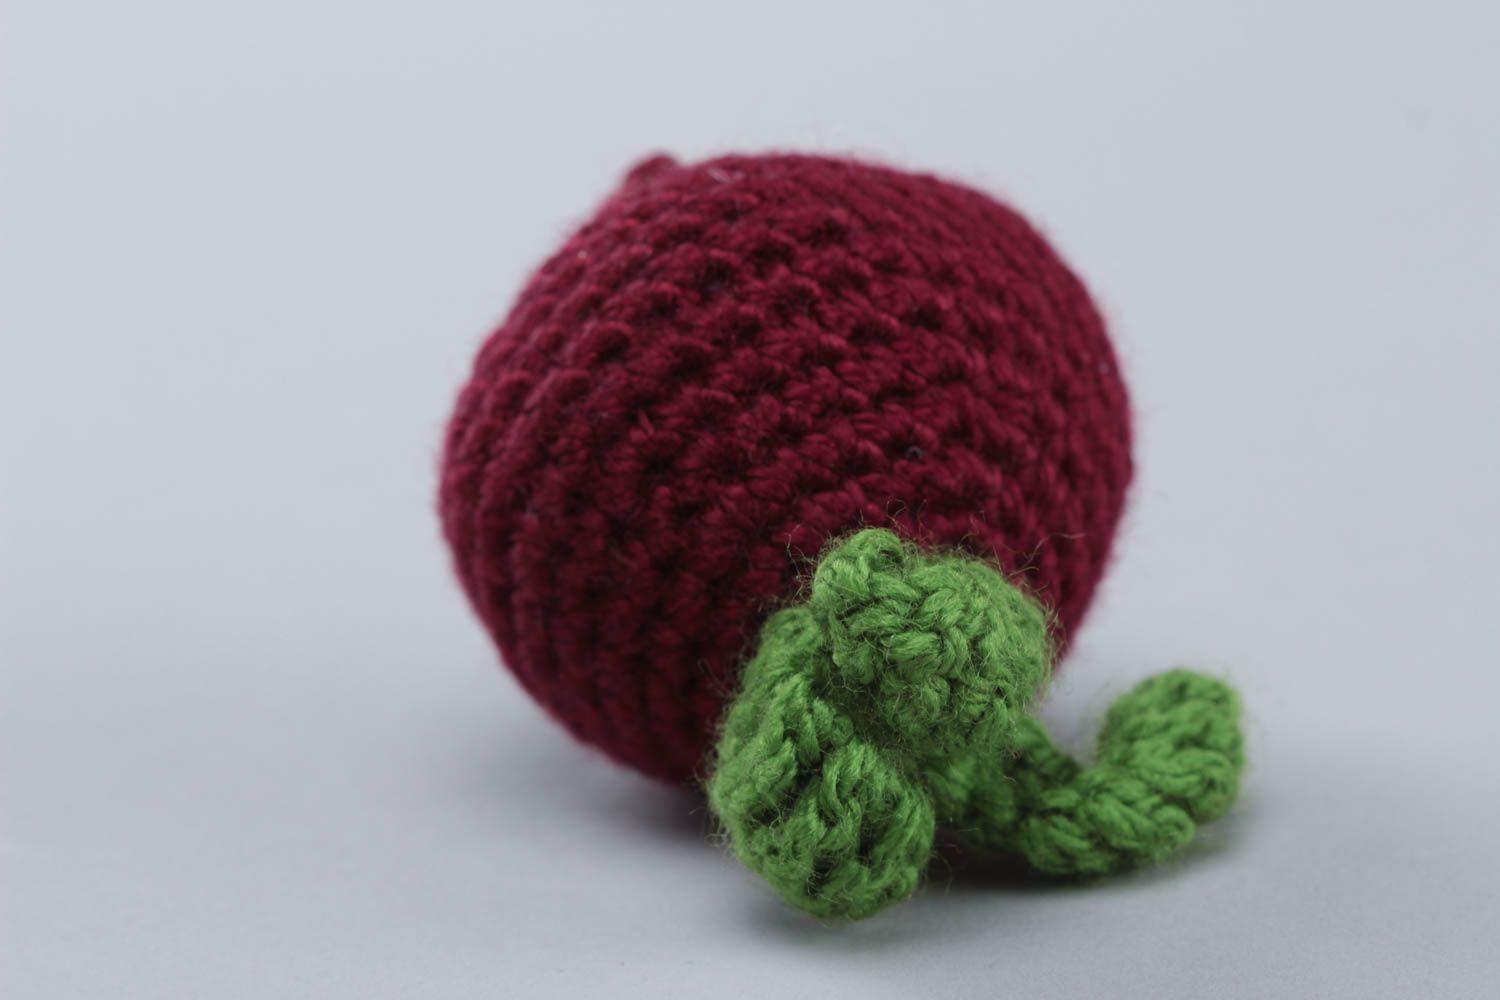 Handmade small acrylic crochet soft toy vegetable beet for kids and decor photo 3